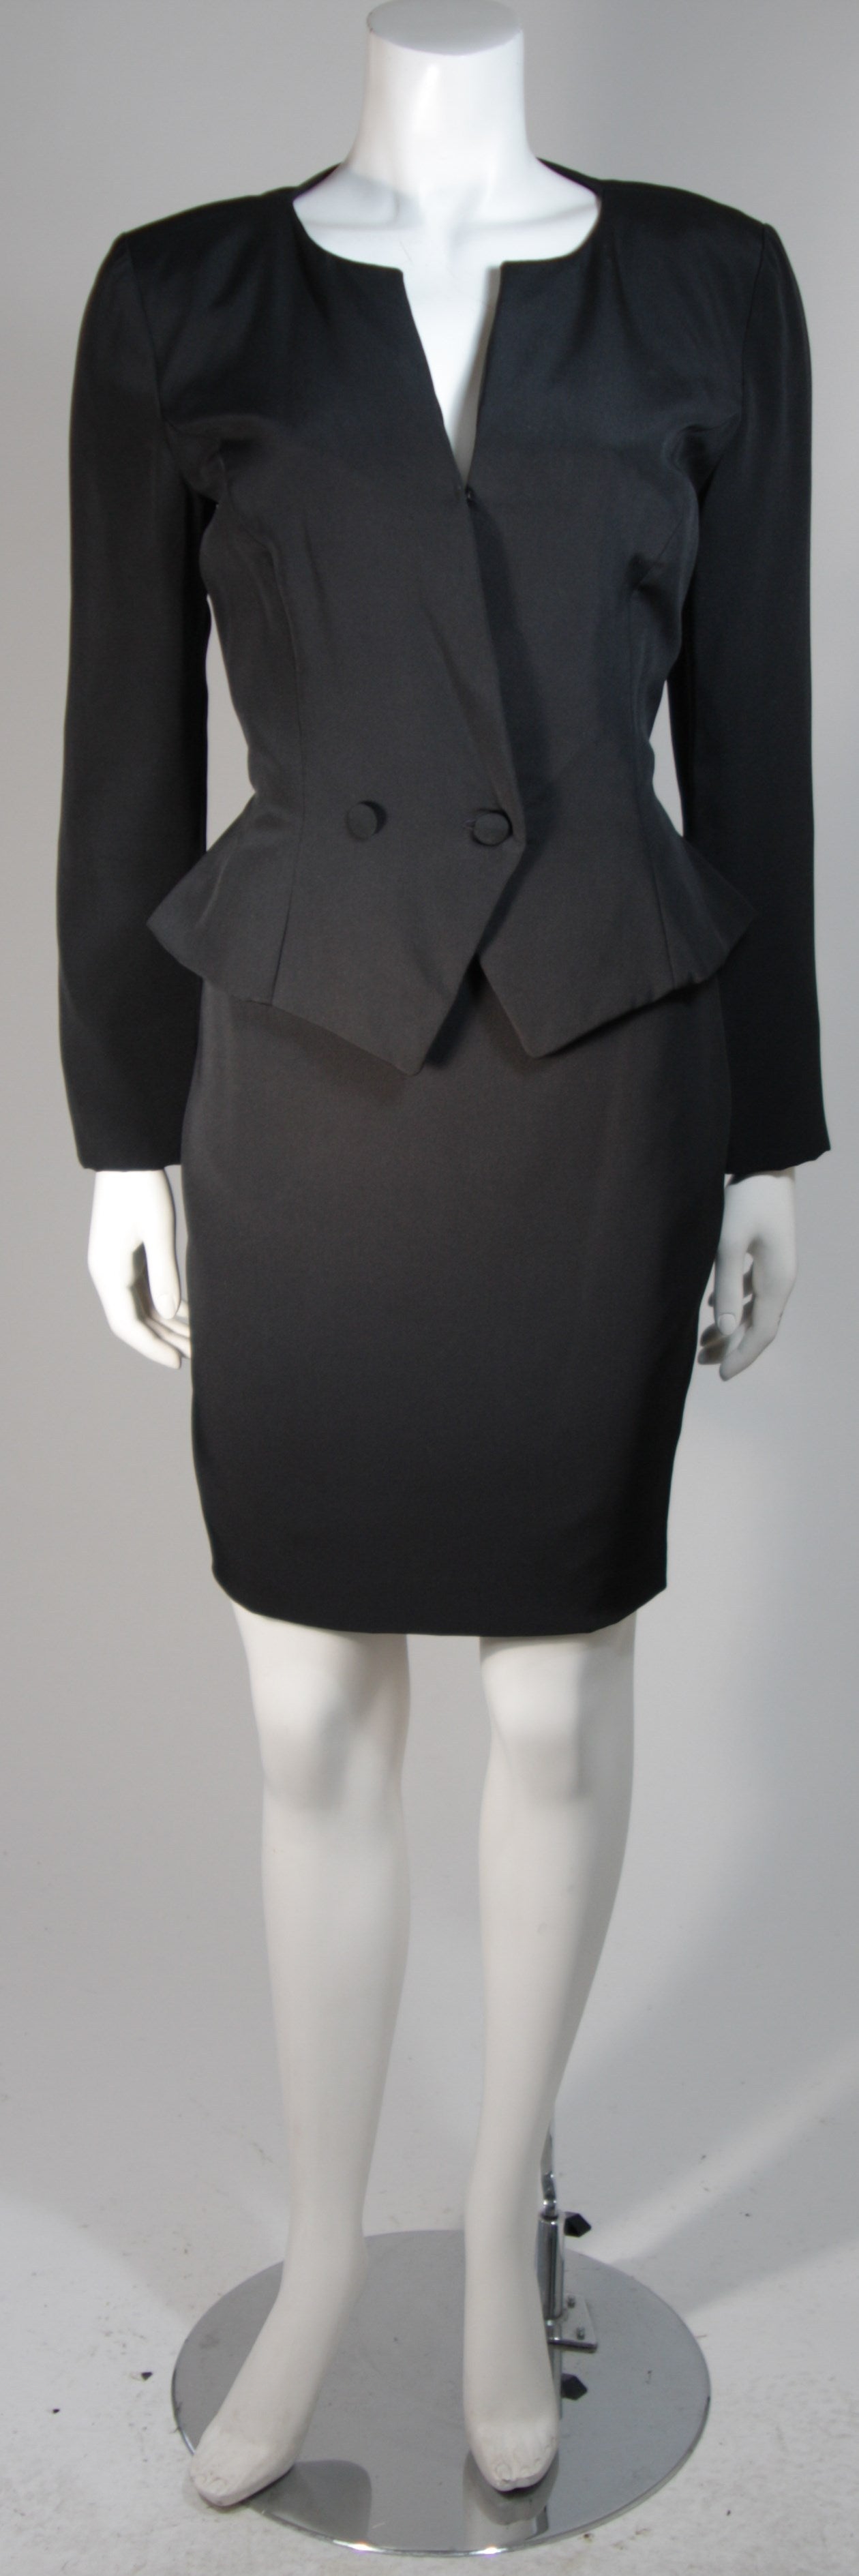 This Vicky Tiel suit is composed of a black silk and features a lace panel on the back of the jacket. The jacket features a center front button fastening. There are two a pencil silhouette style skirts with zipper closures. In excellent condition.